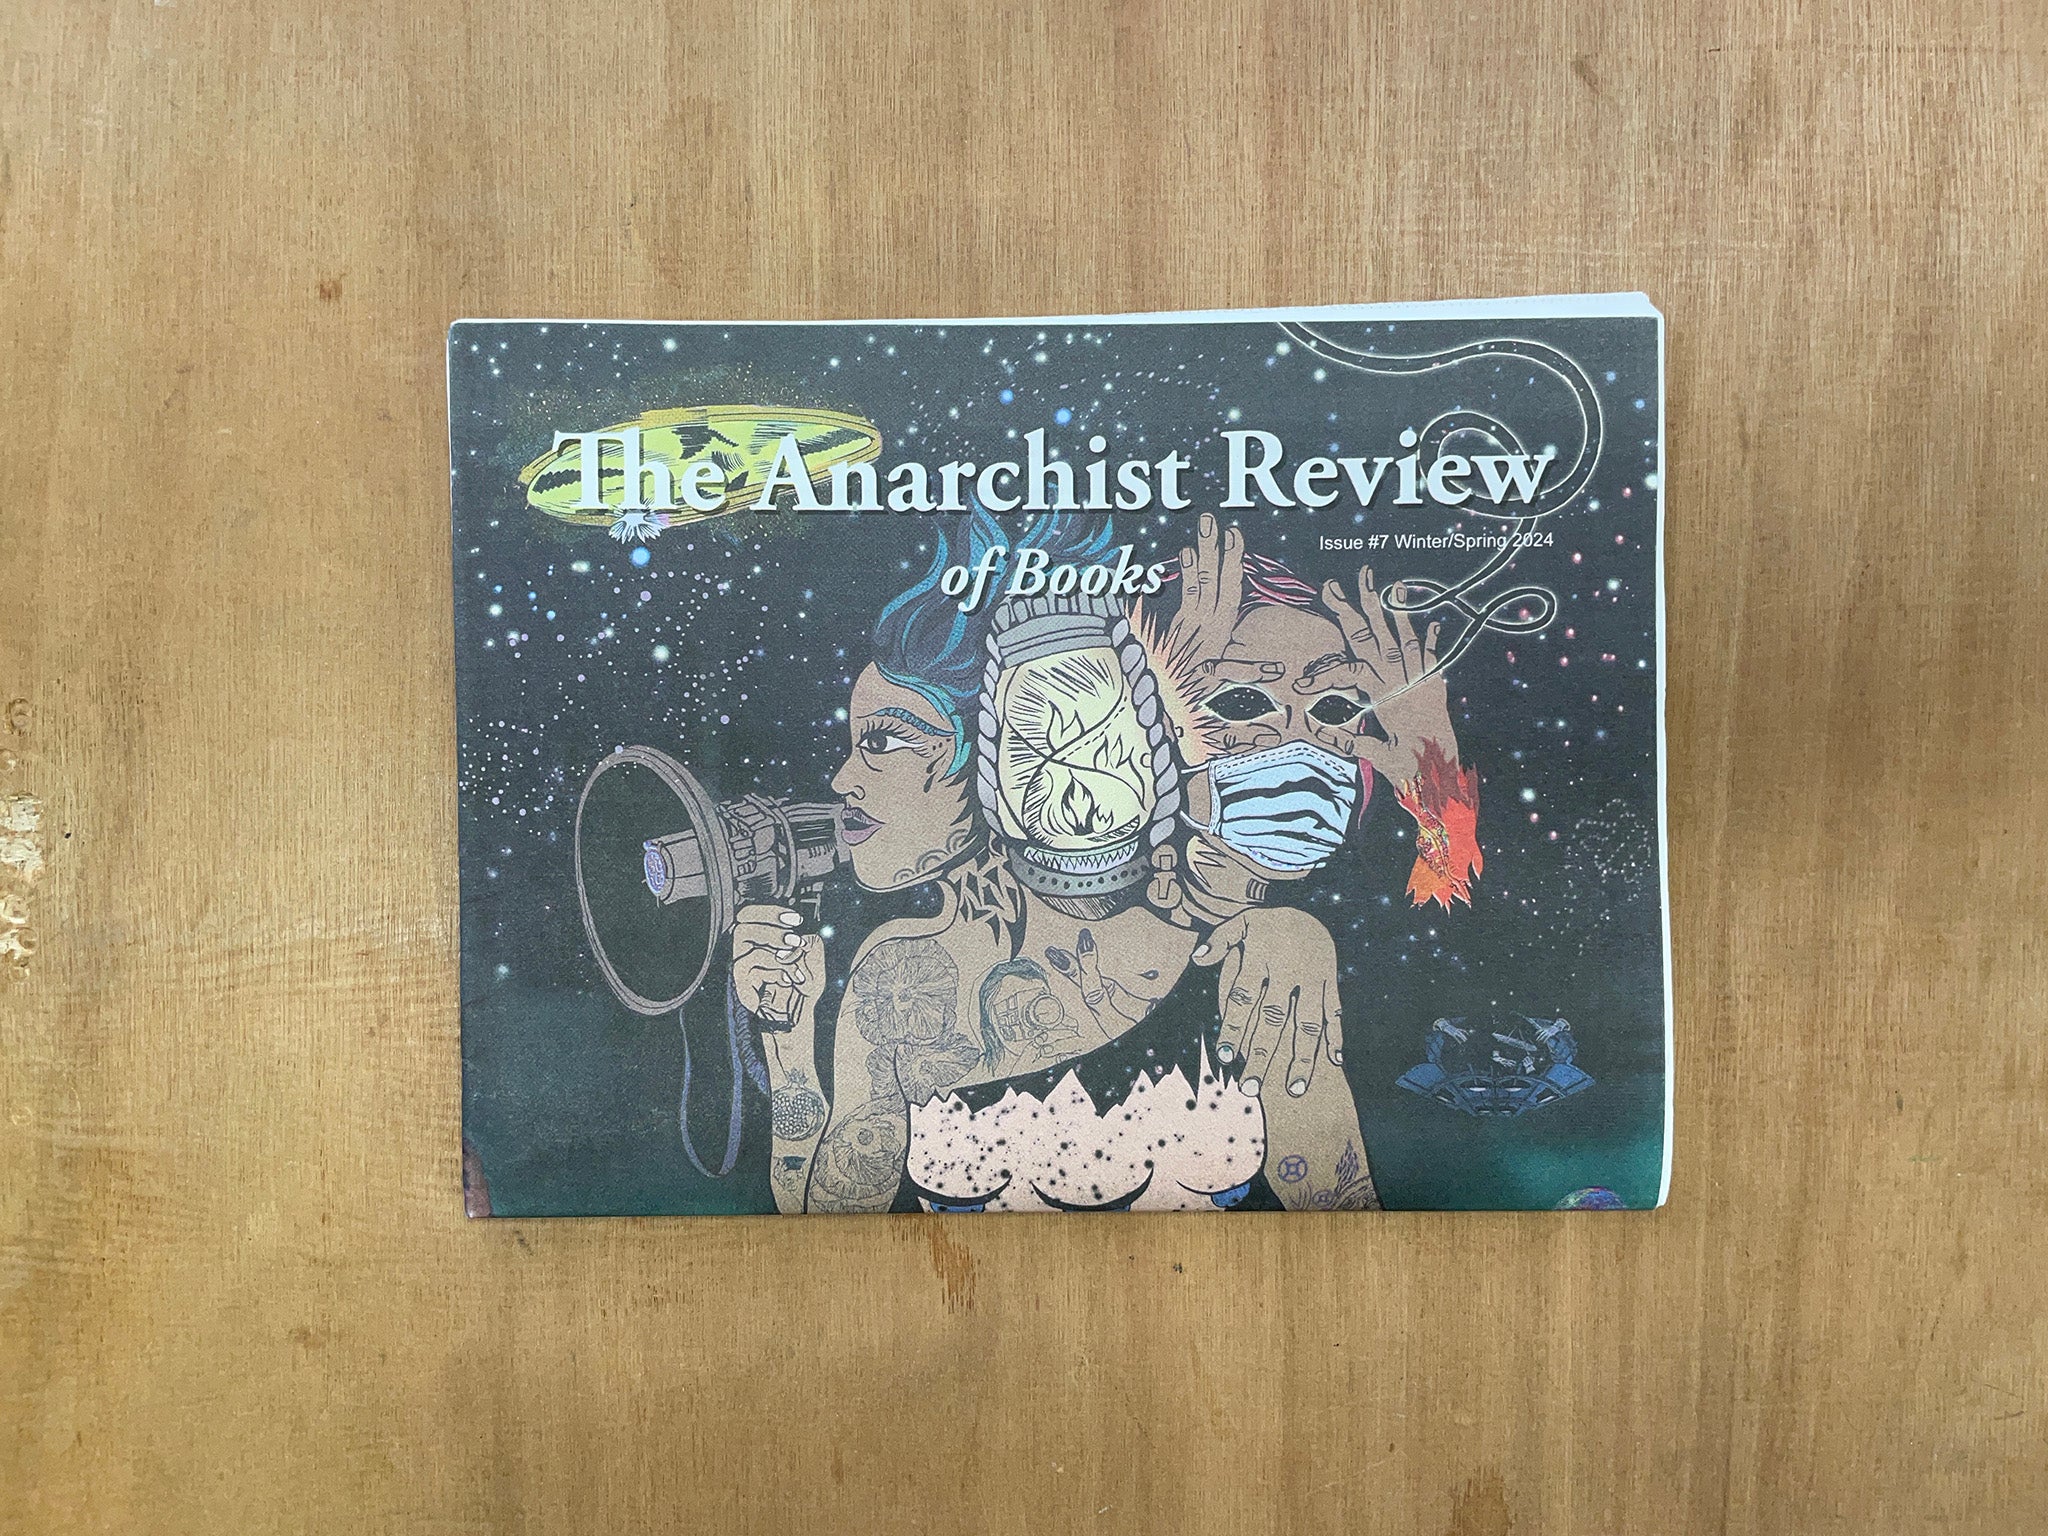 THE ANARCHIST REVIEW OF BOOKS ISSUE #7